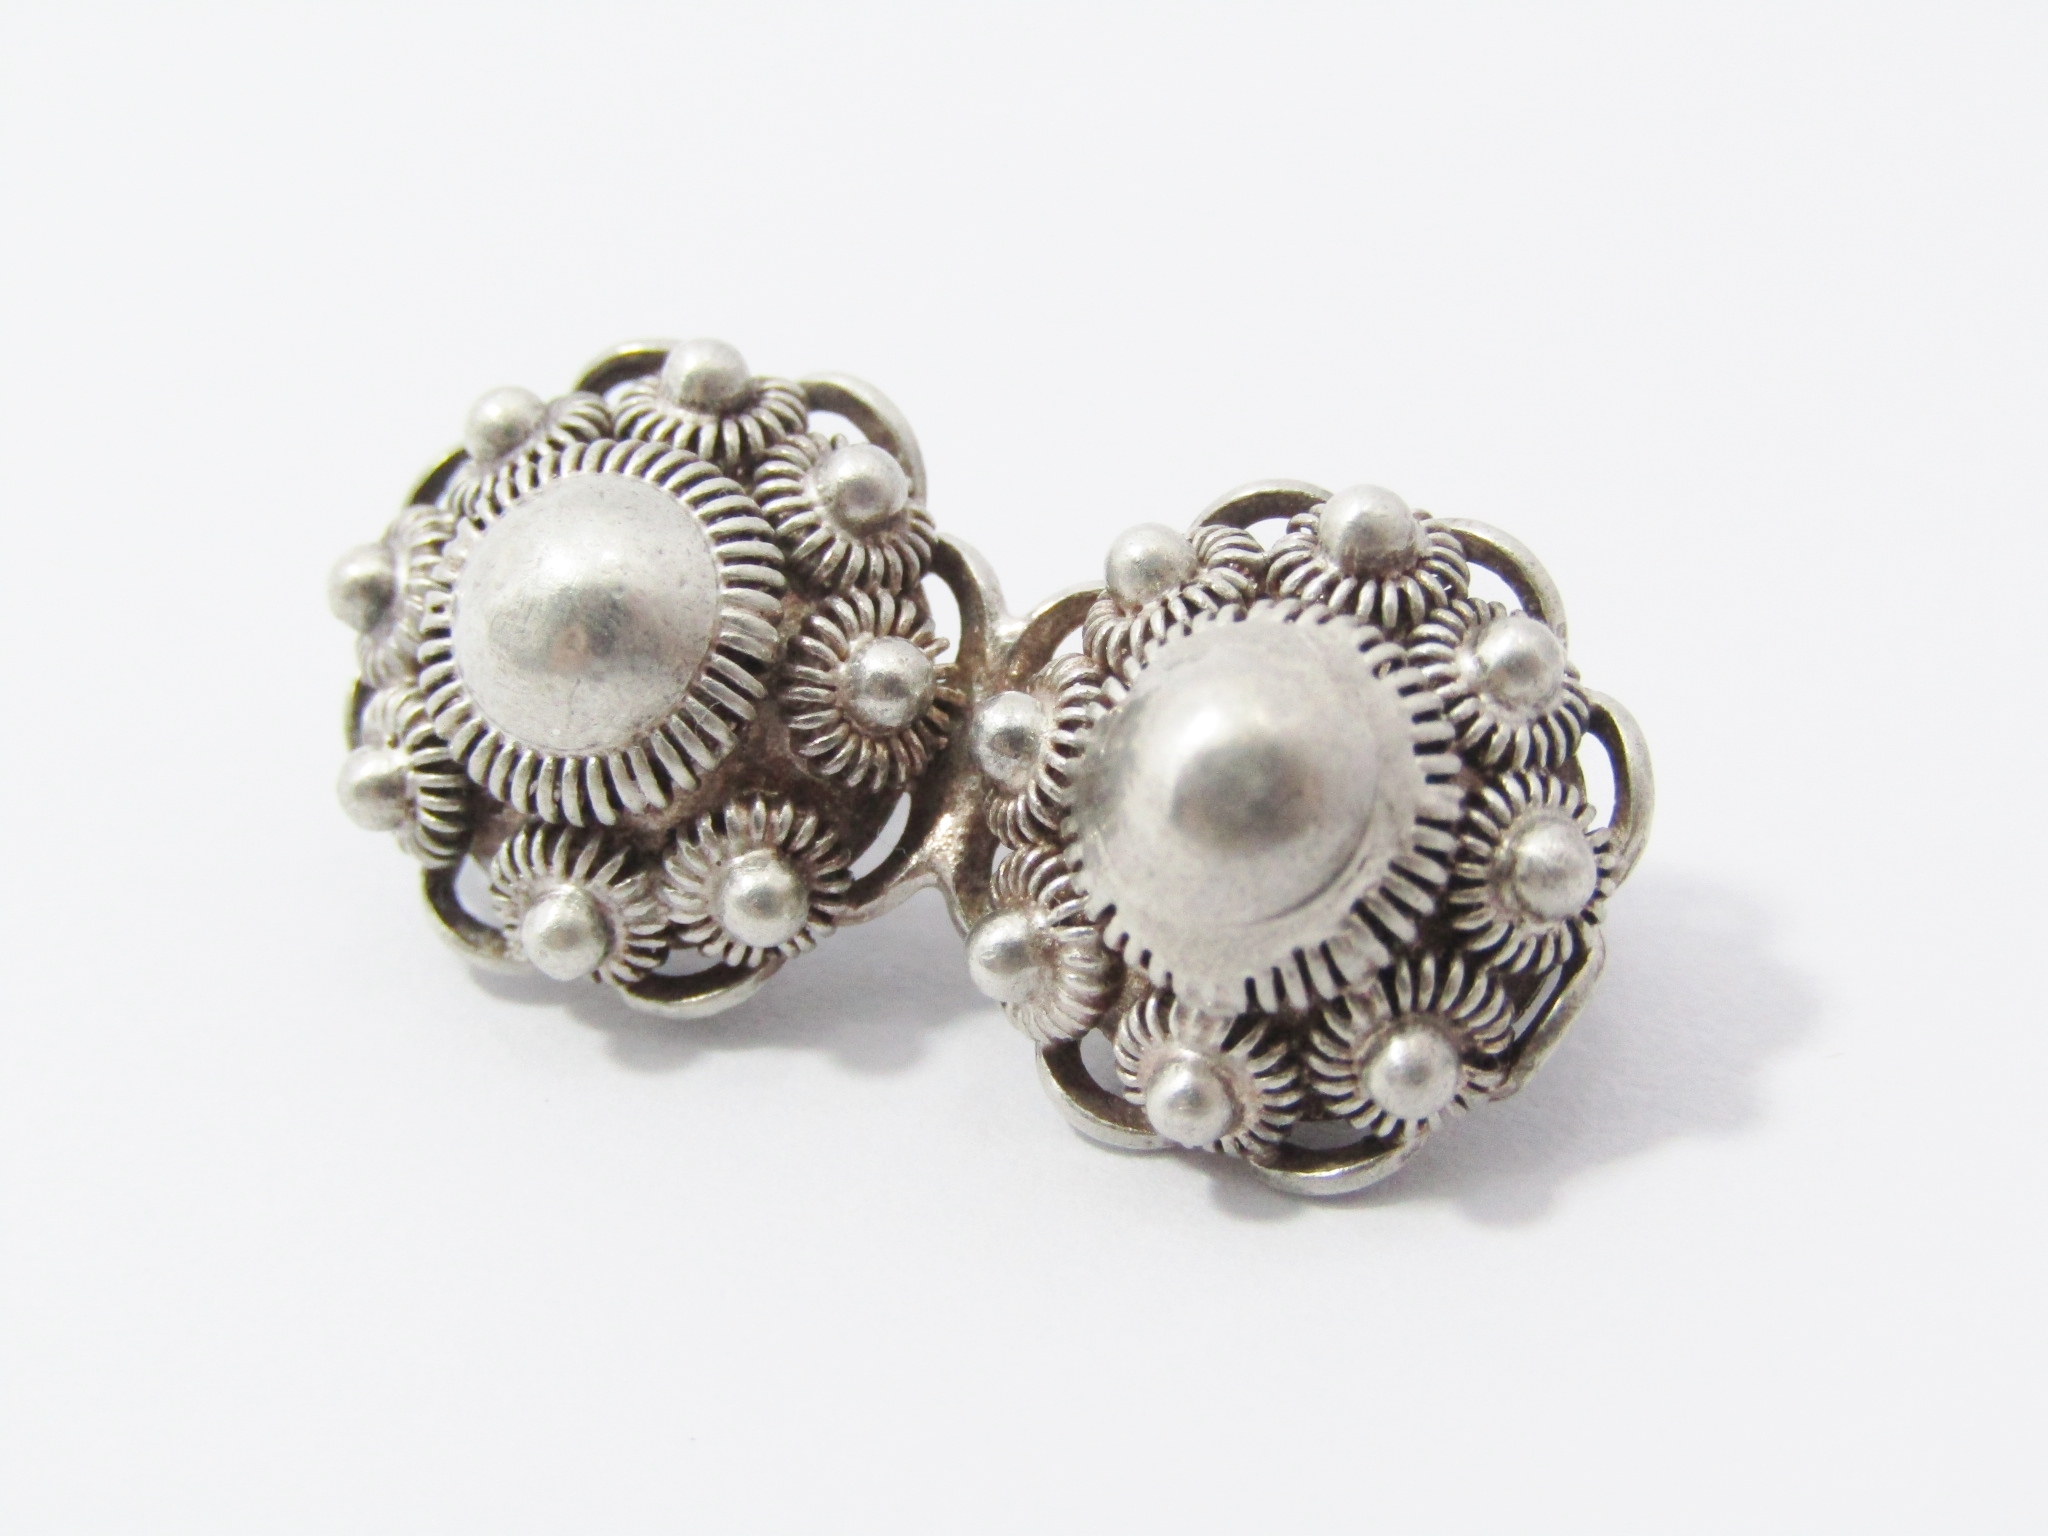 A Gorgeous Dutch Button Brooch Pin in Sterling Silver.